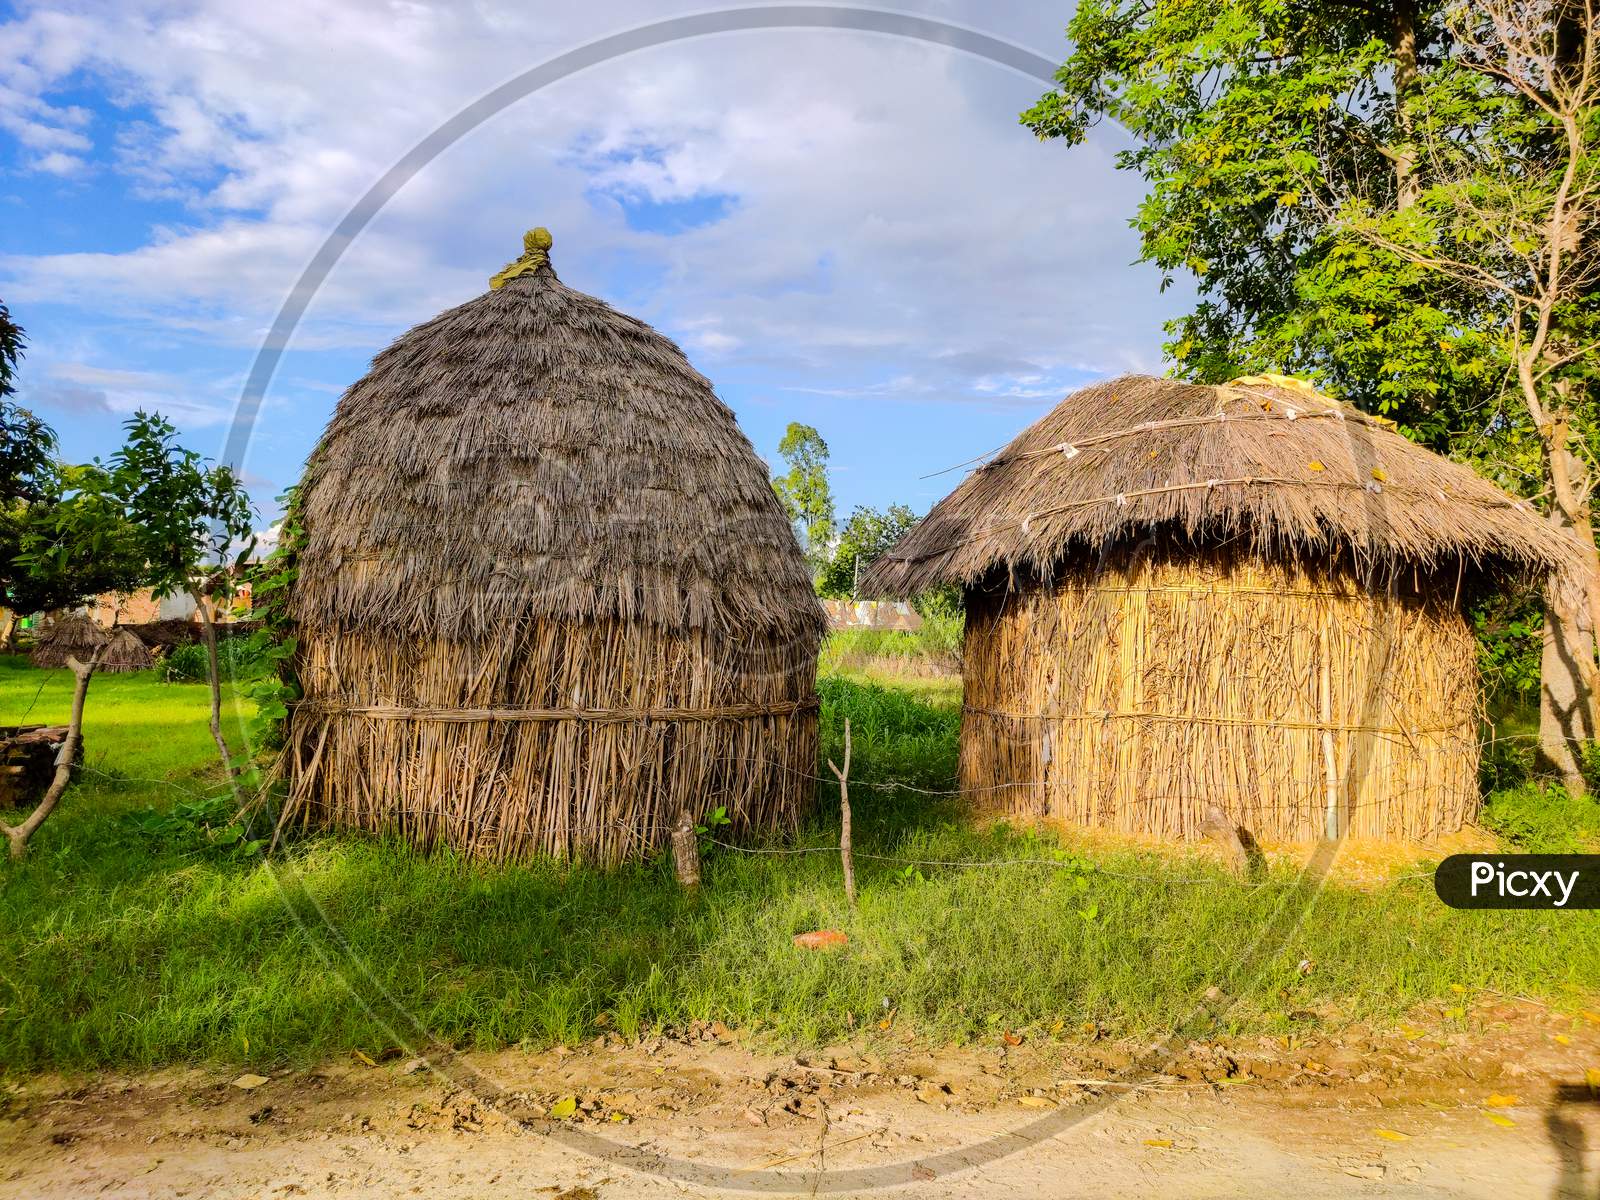 Hut made from tree  leaves and sticks in village Used for animal food storage